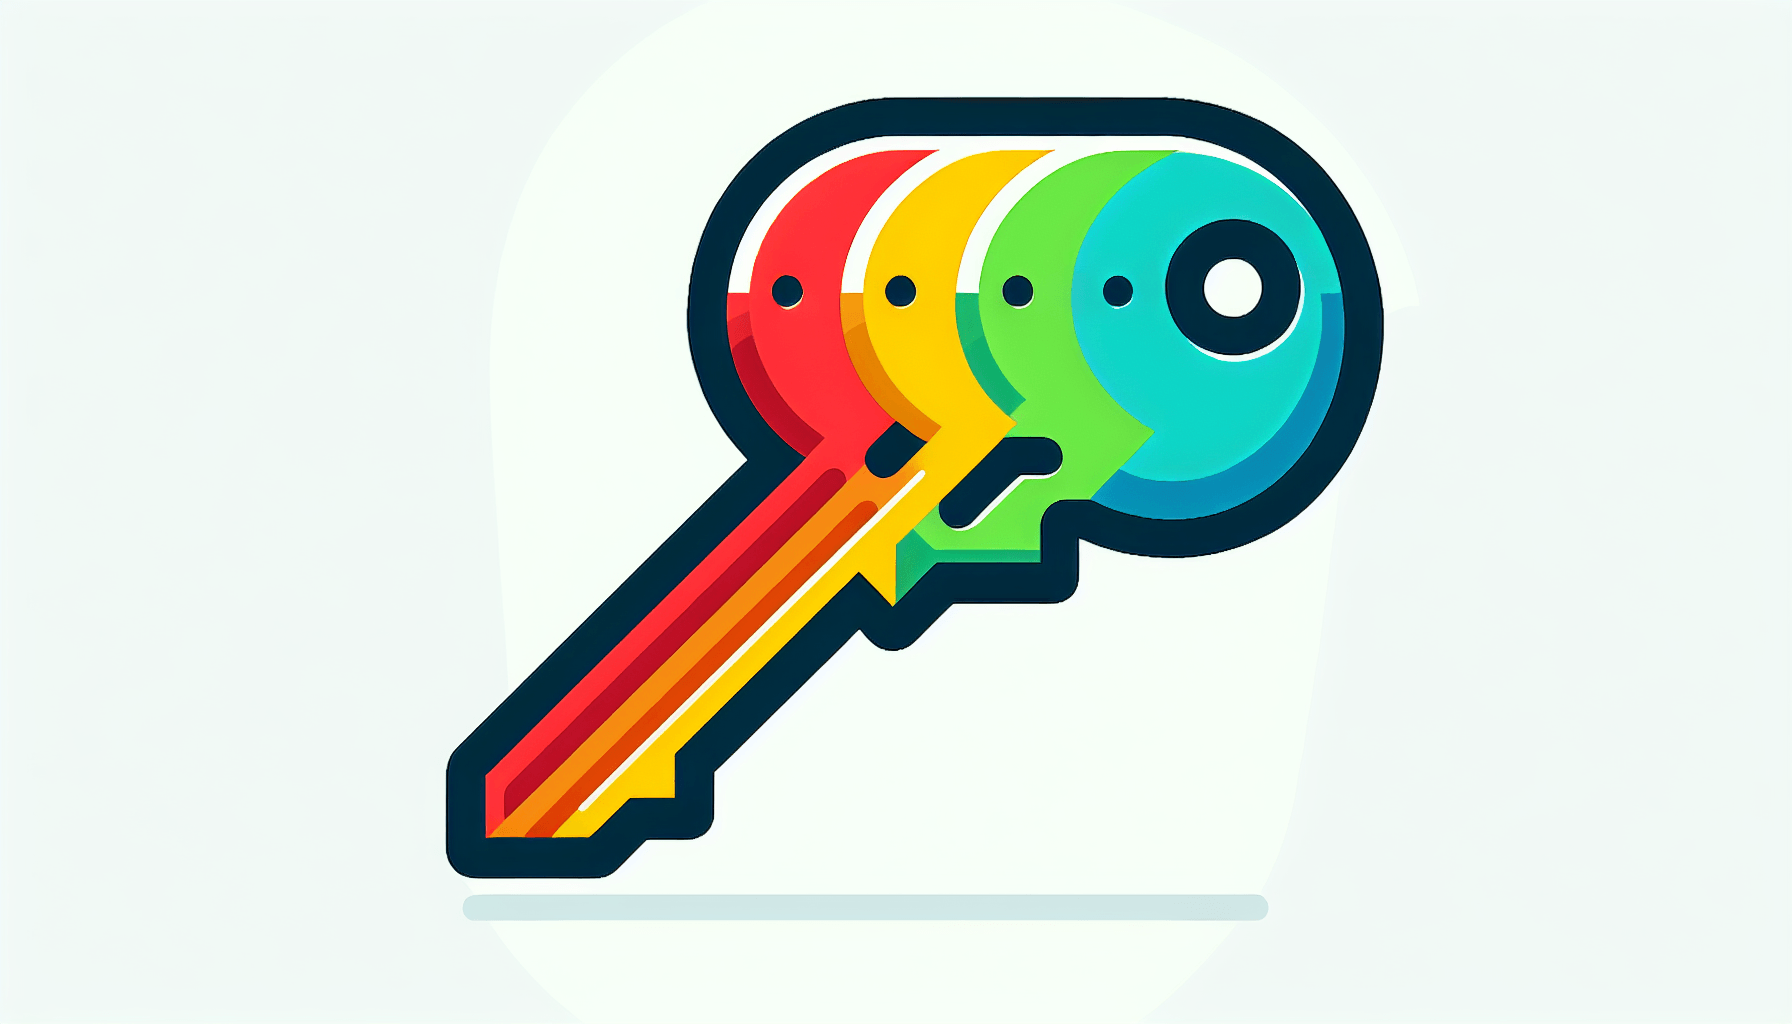 Key in flat illustration style and white background, red #f47574, green #88c7a8, yellow #fcc44b, and blue #645bc8 colors.